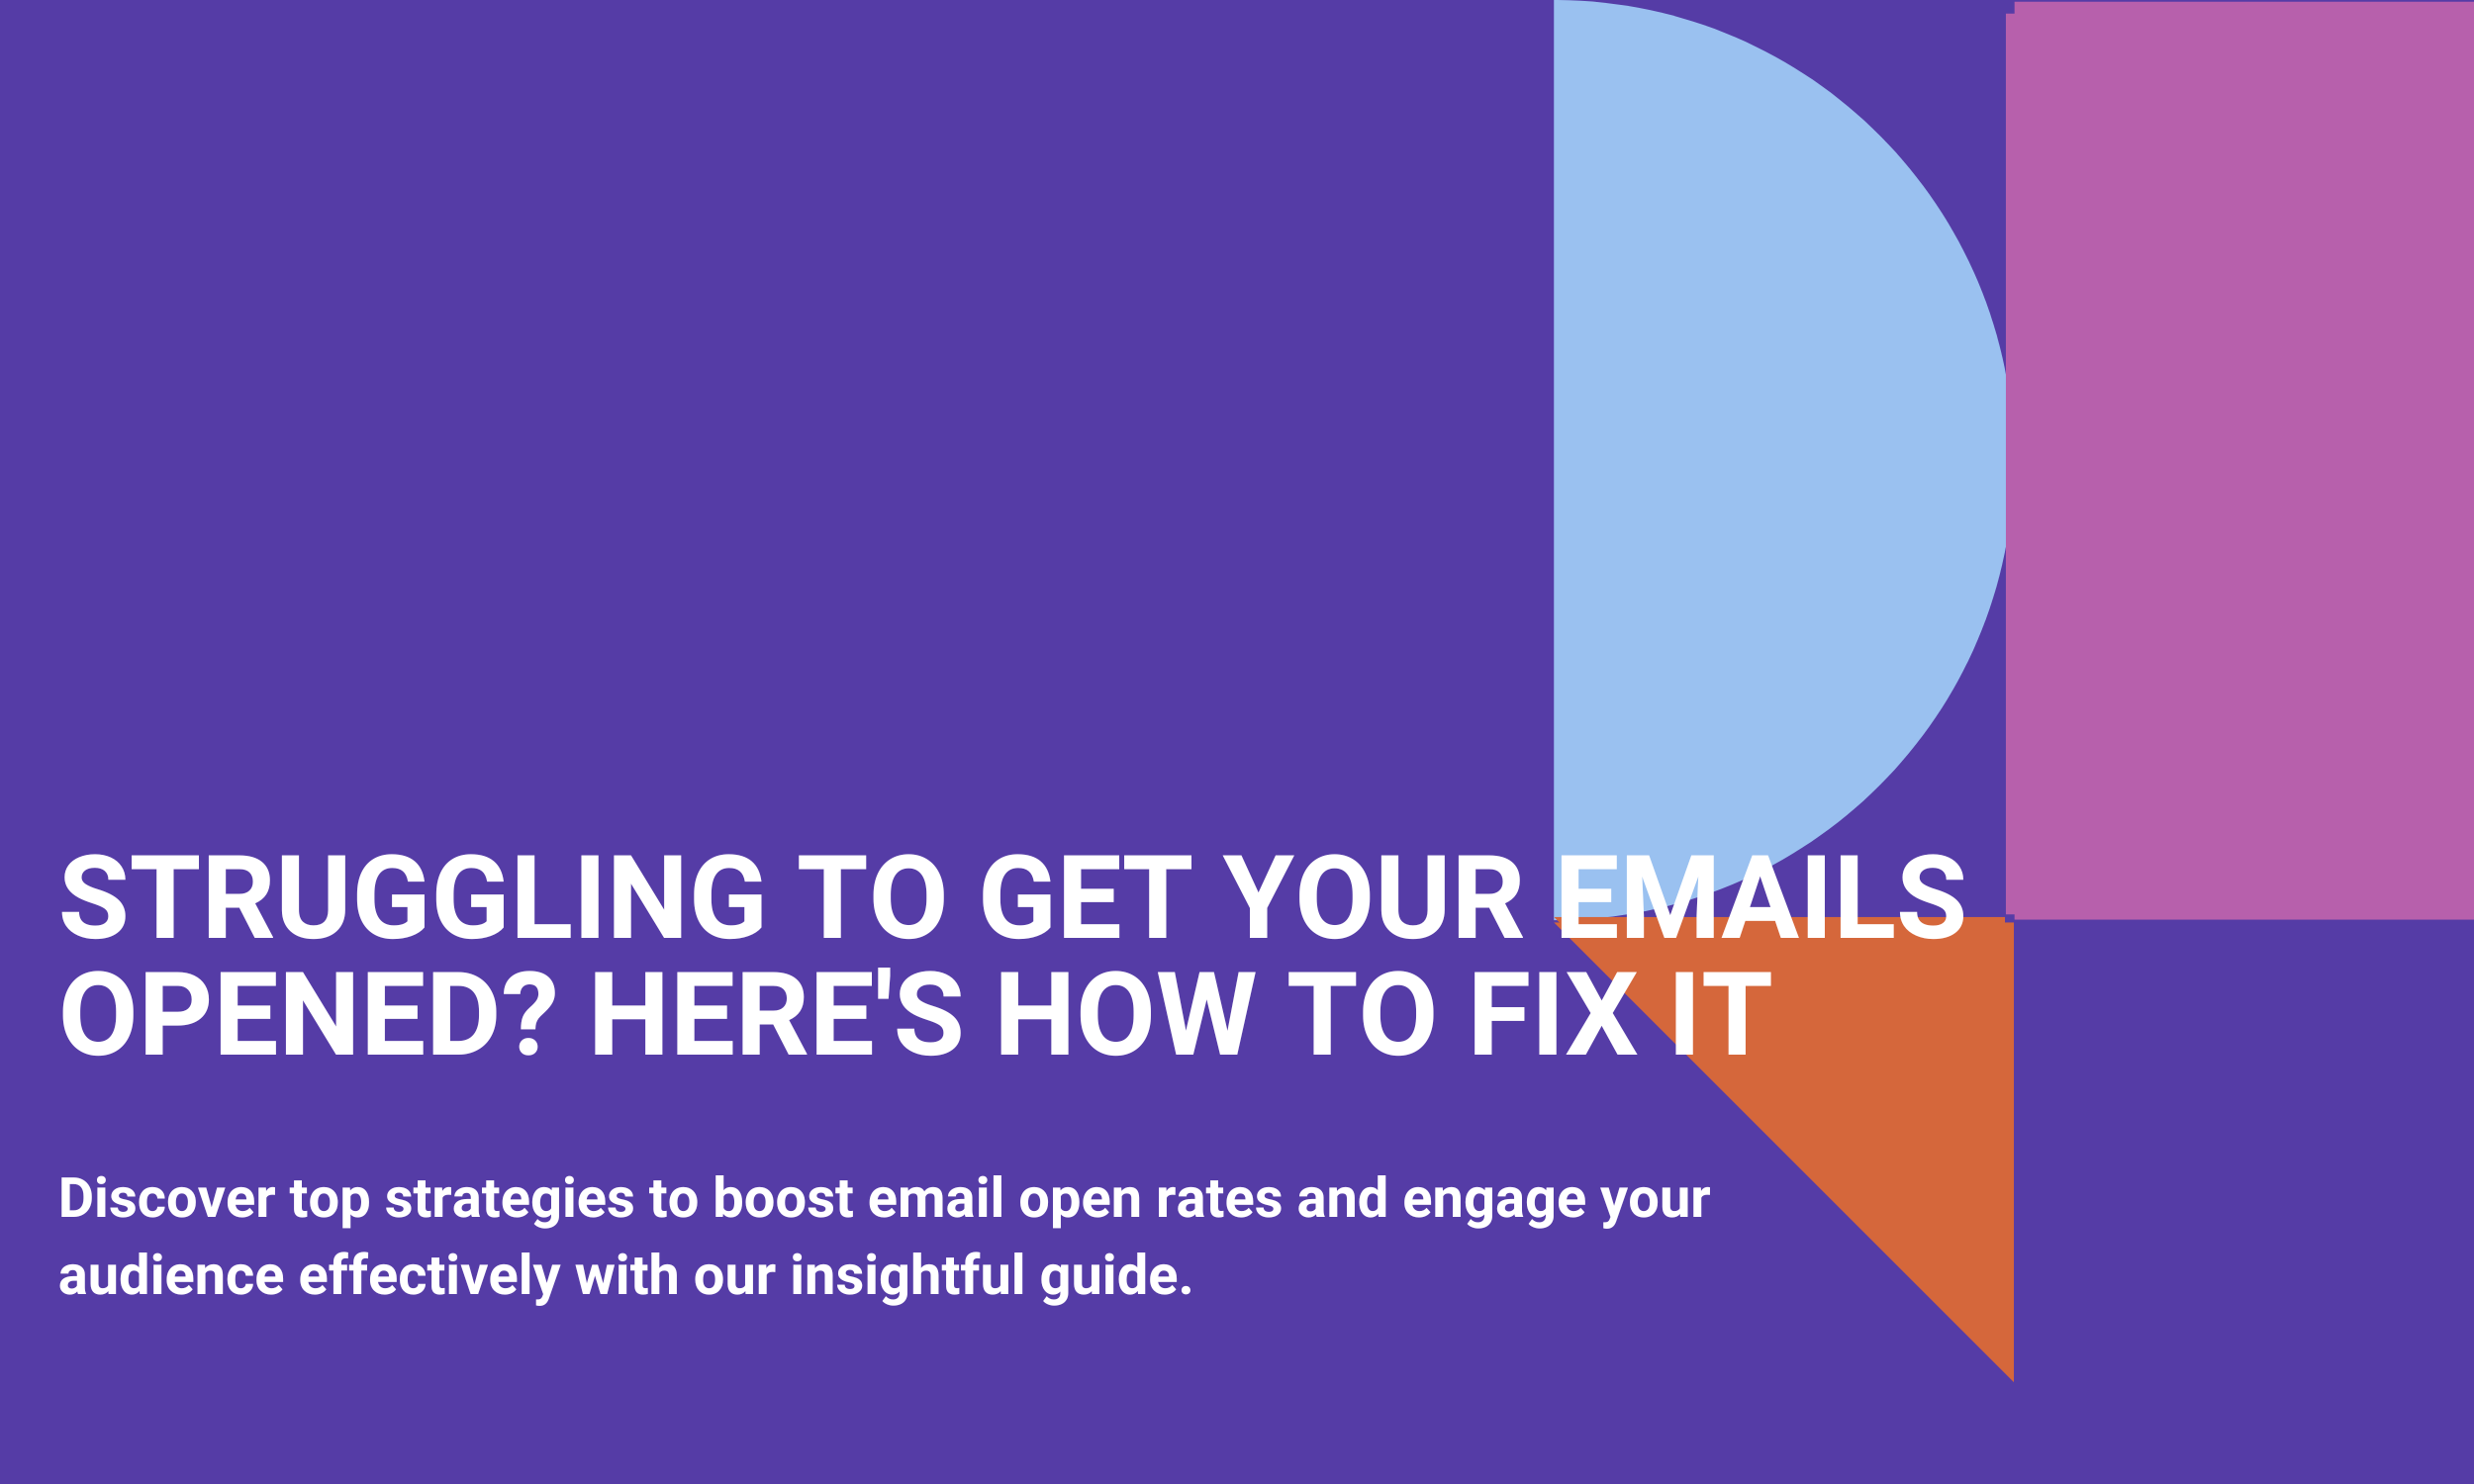 Struggling To Get Your Emails Opened? Here's How To Fix It